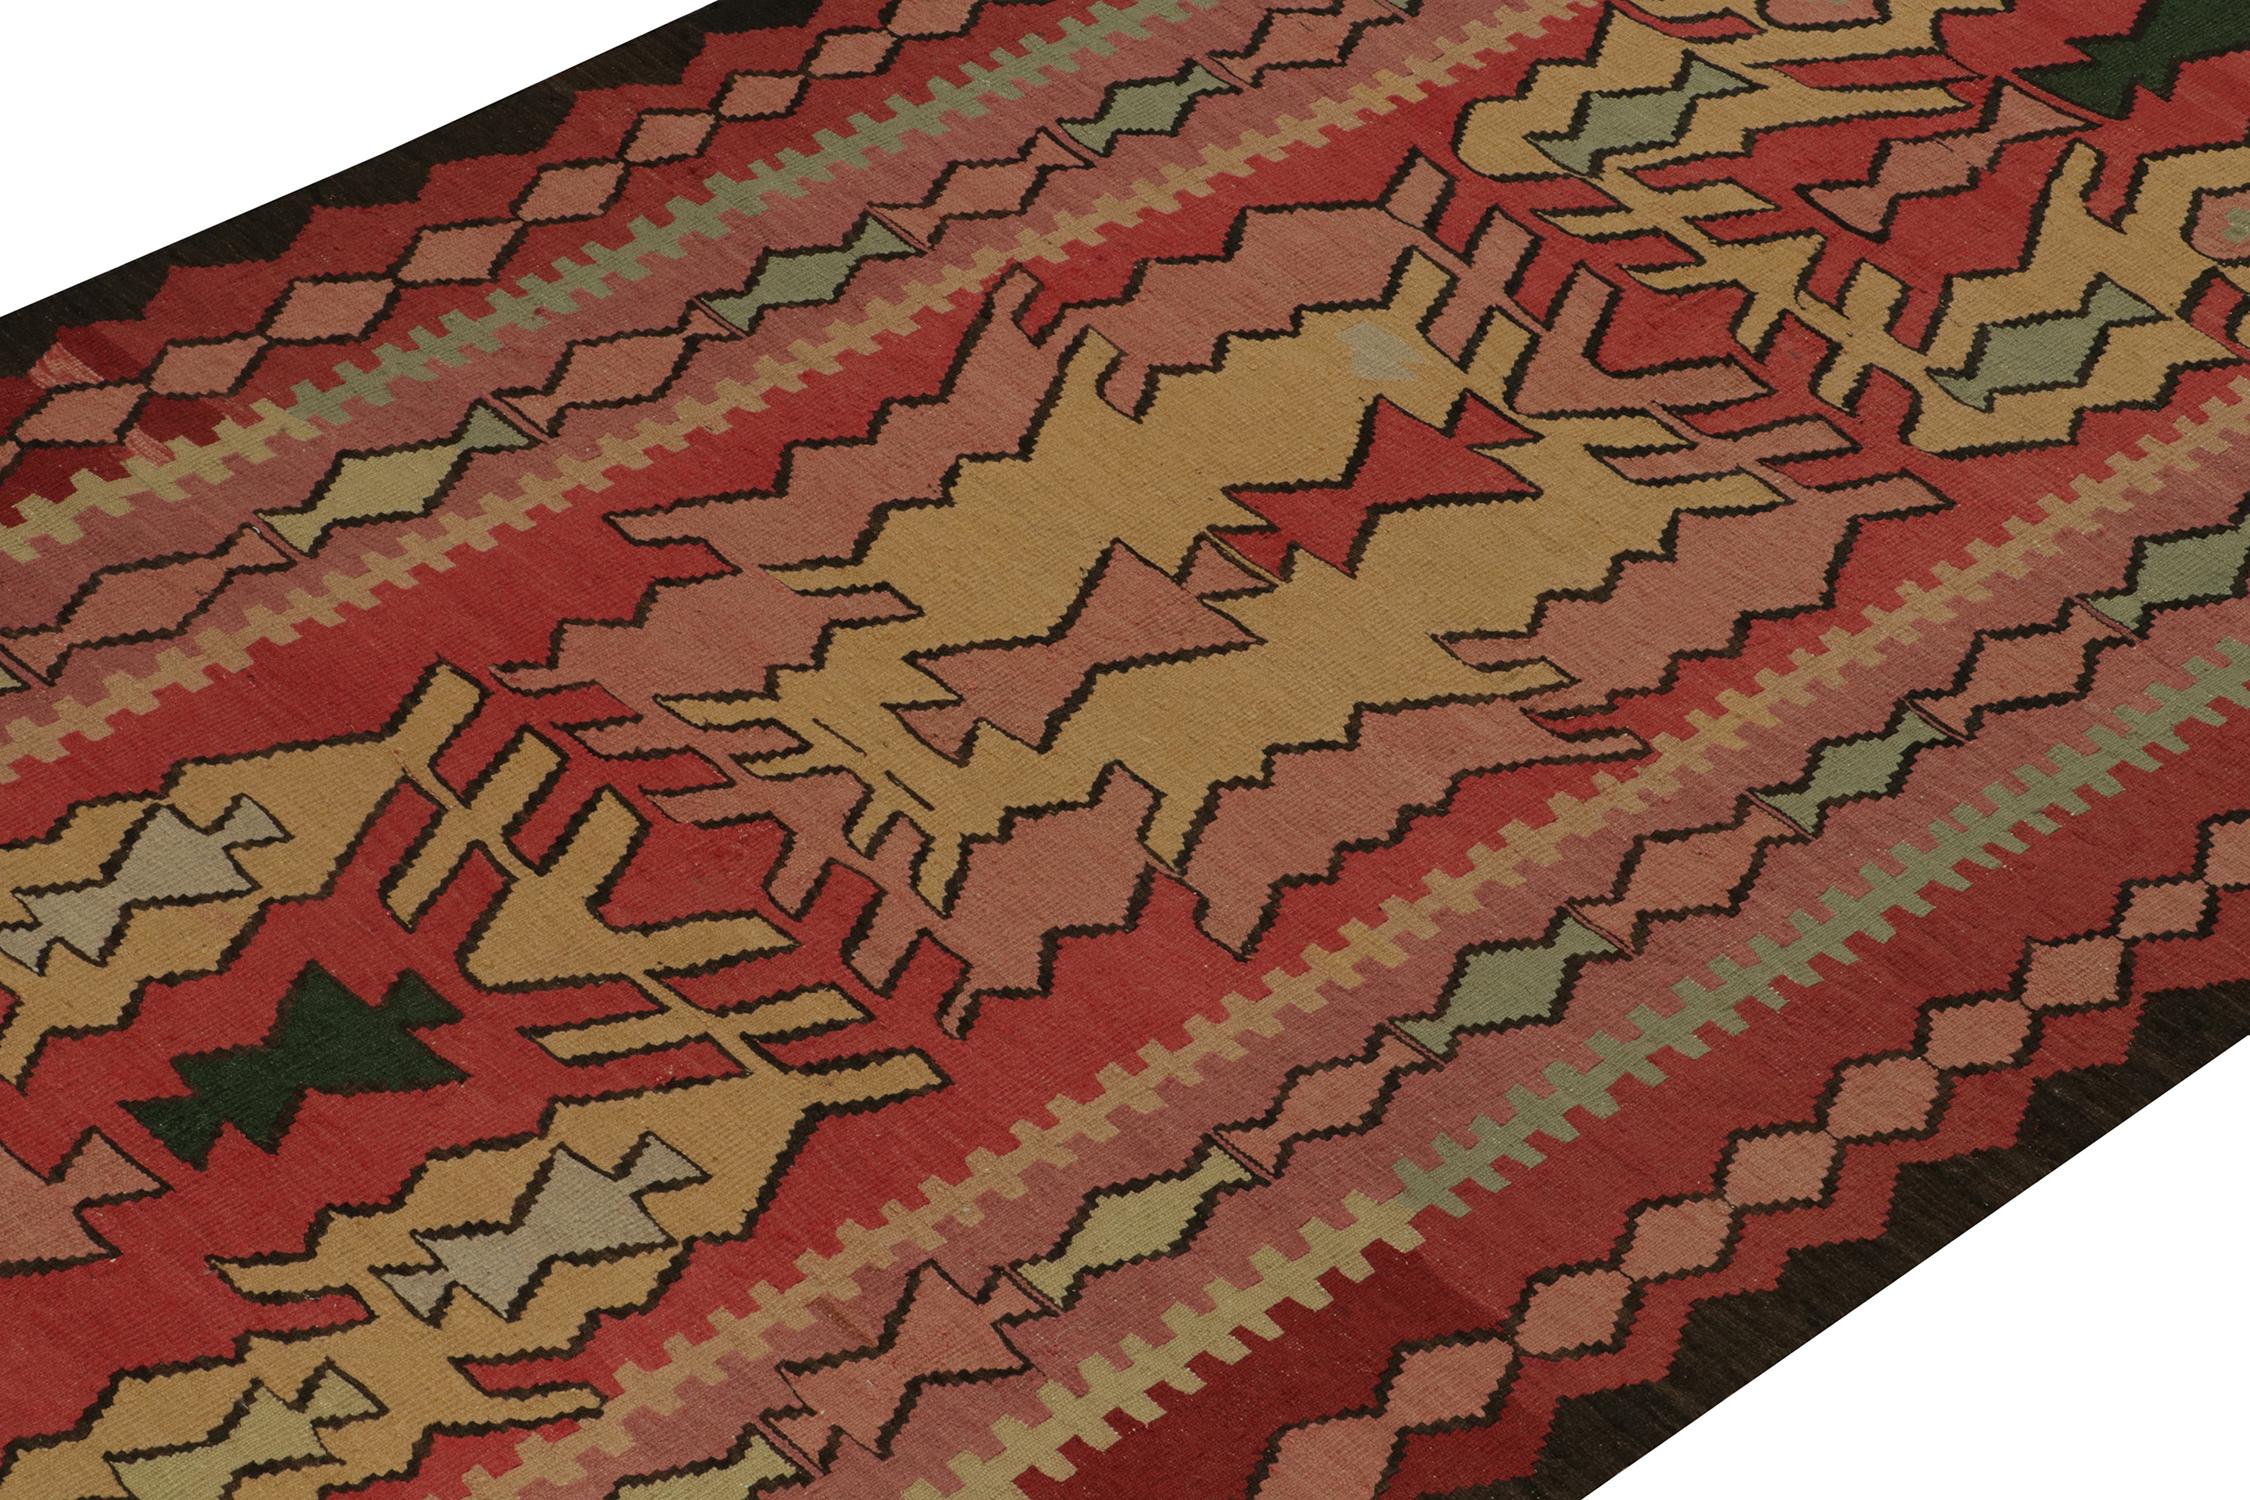 Vintage Persian Tribal Kilim Rug in Red, Pink, Gold Patterns Rug & Kilim In Good Condition For Sale In Long Island City, NY